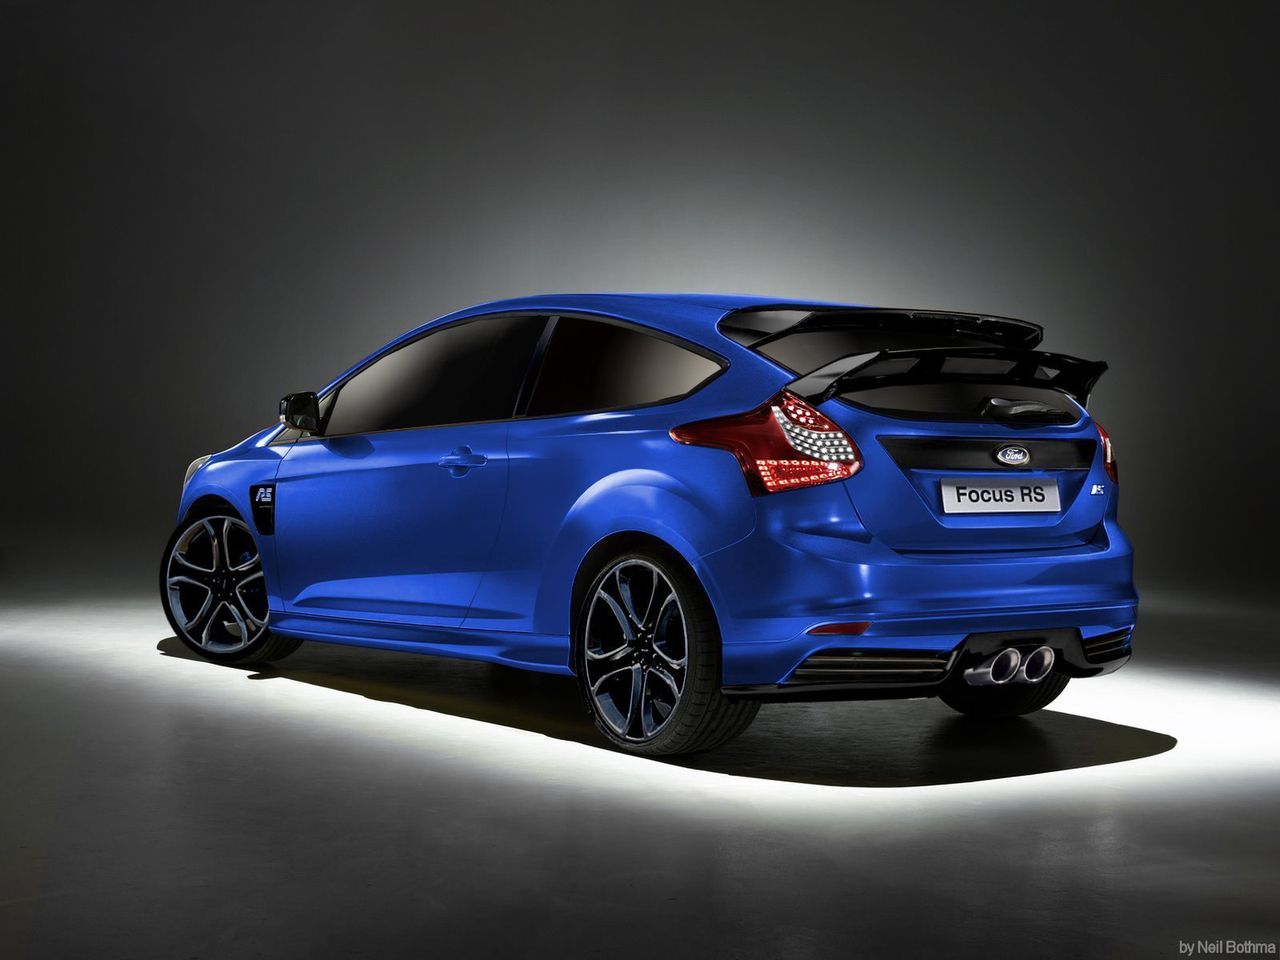 Nowy Ford Focus RS o mocy 335 KM?!